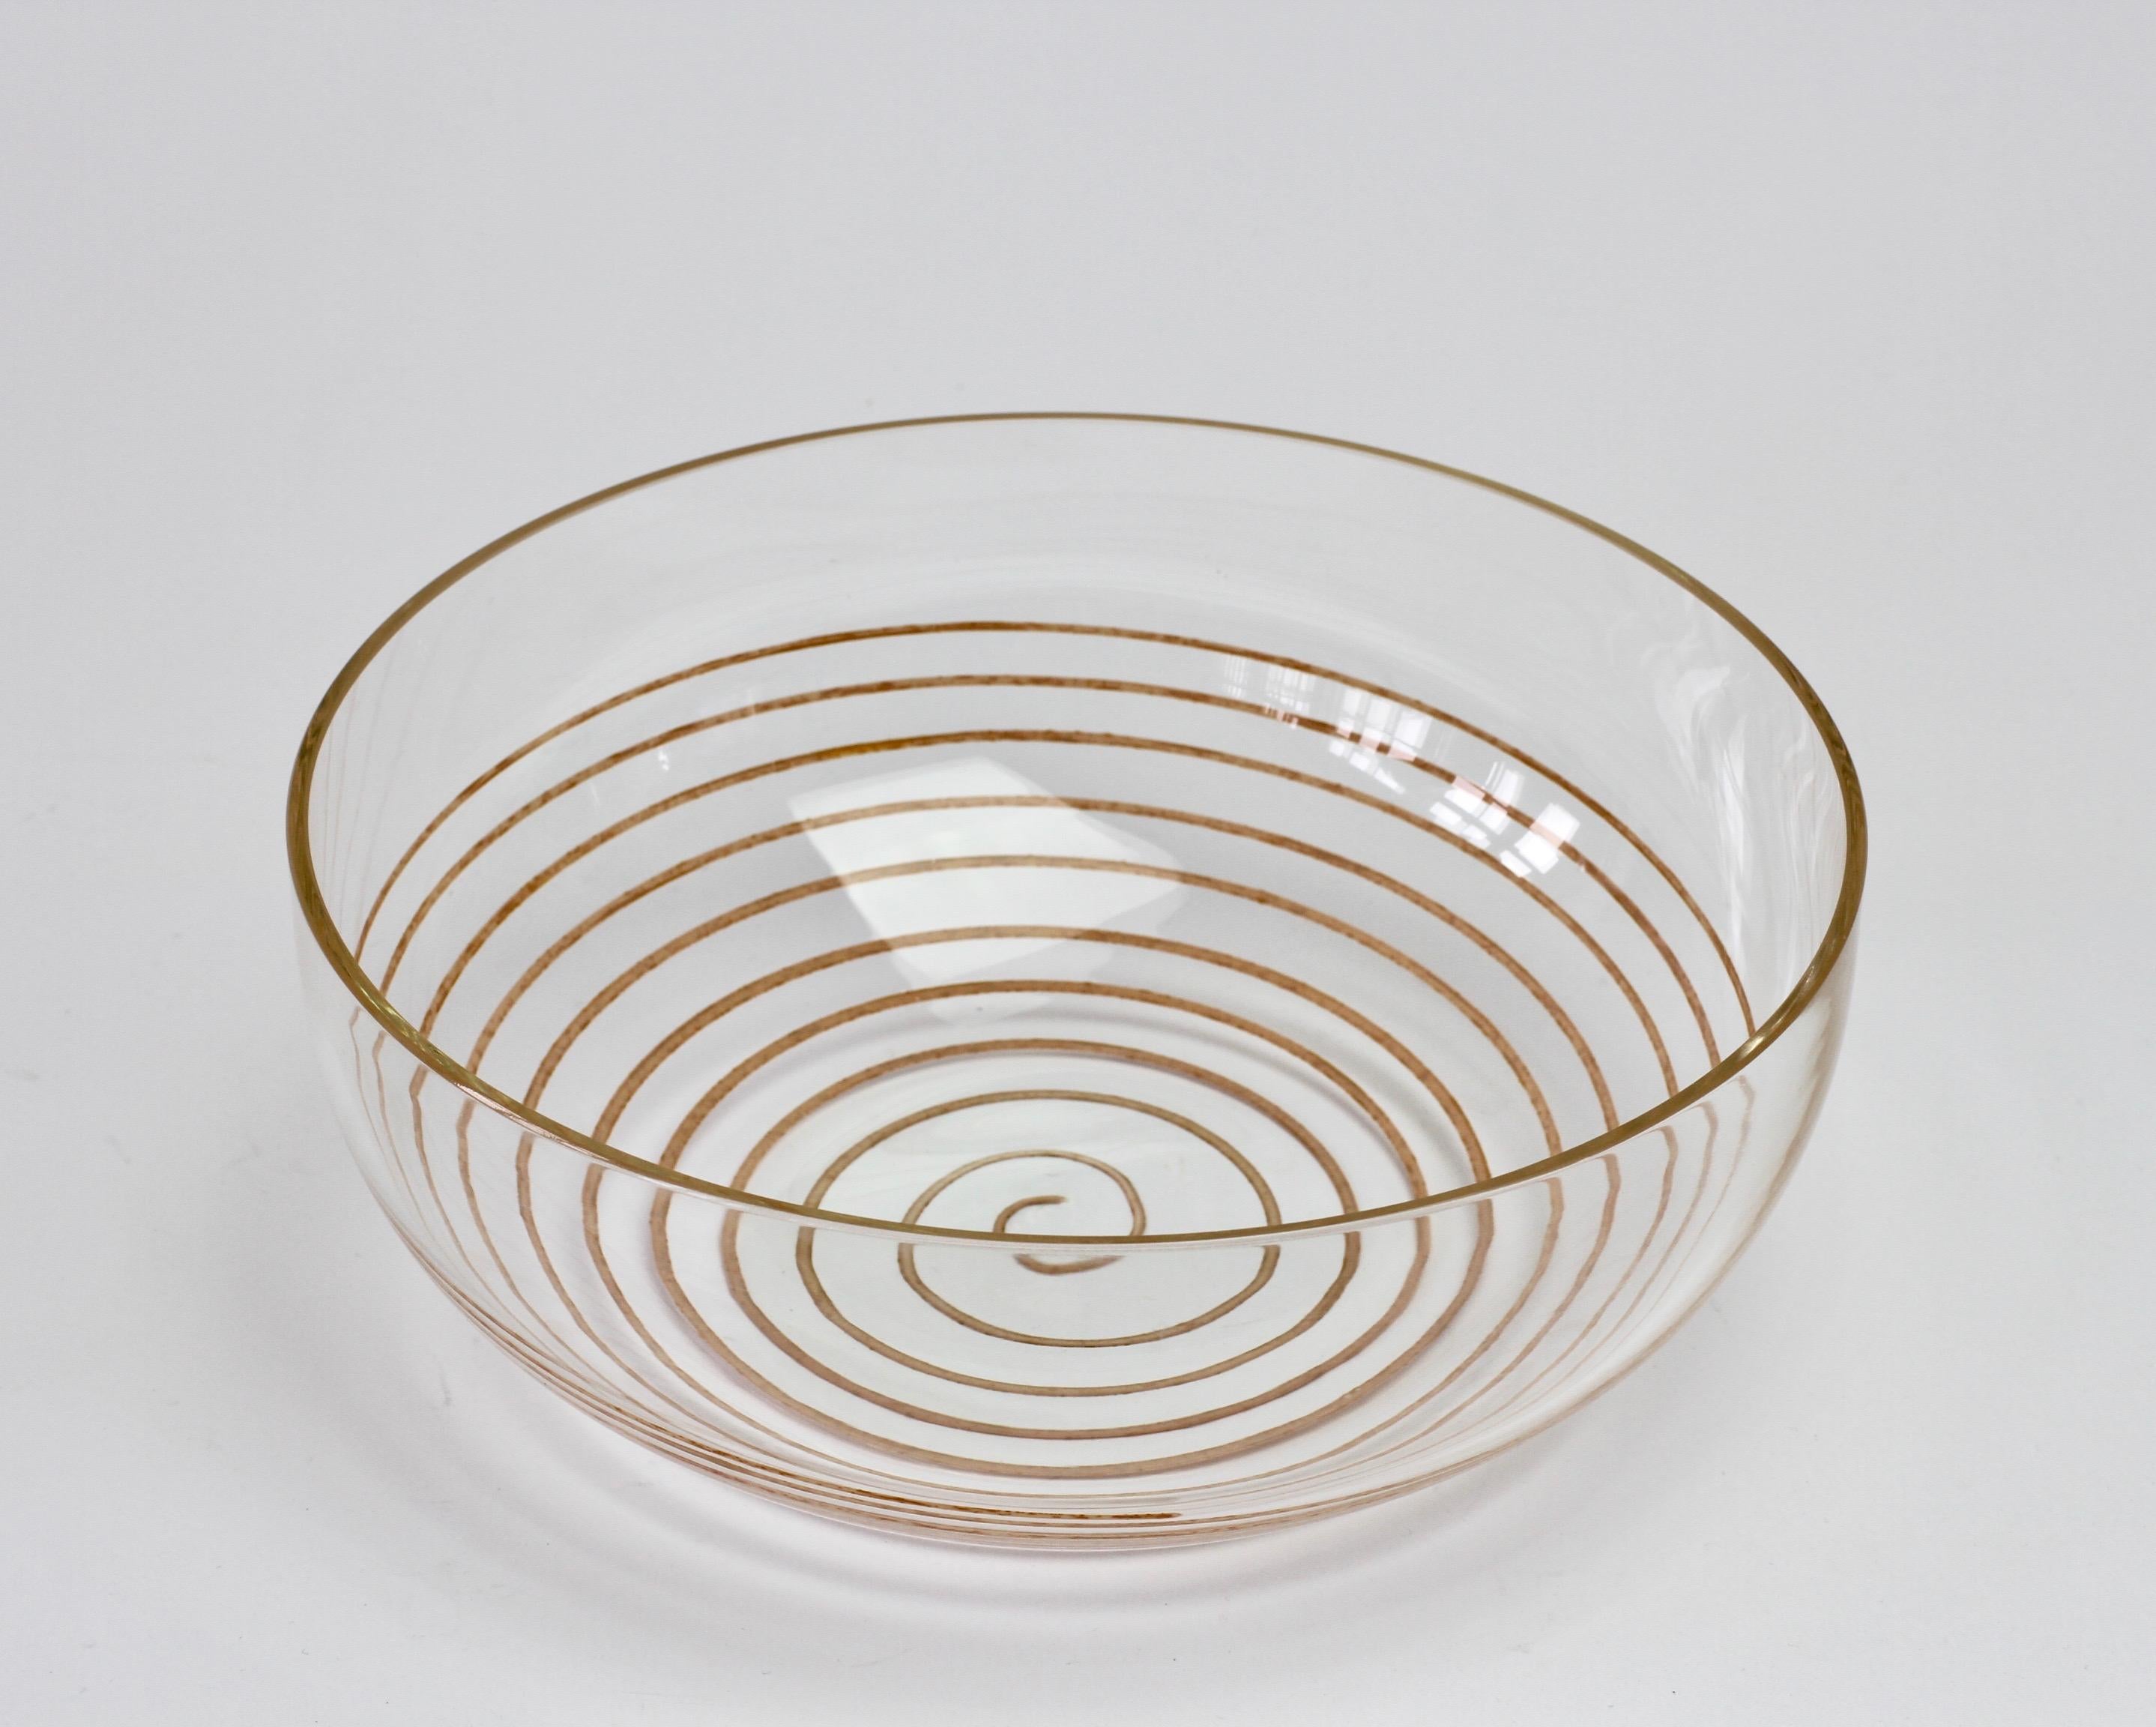 Vintage midcentury Murano glass serving bowl or dish by Cenedese, circa 1970-1990. Wonderful clear glass with a colorful spiral inclusion. Simplistic yet elegant. Would look fantastic in a kitchen, on a white marble countertop with fruit or snacks